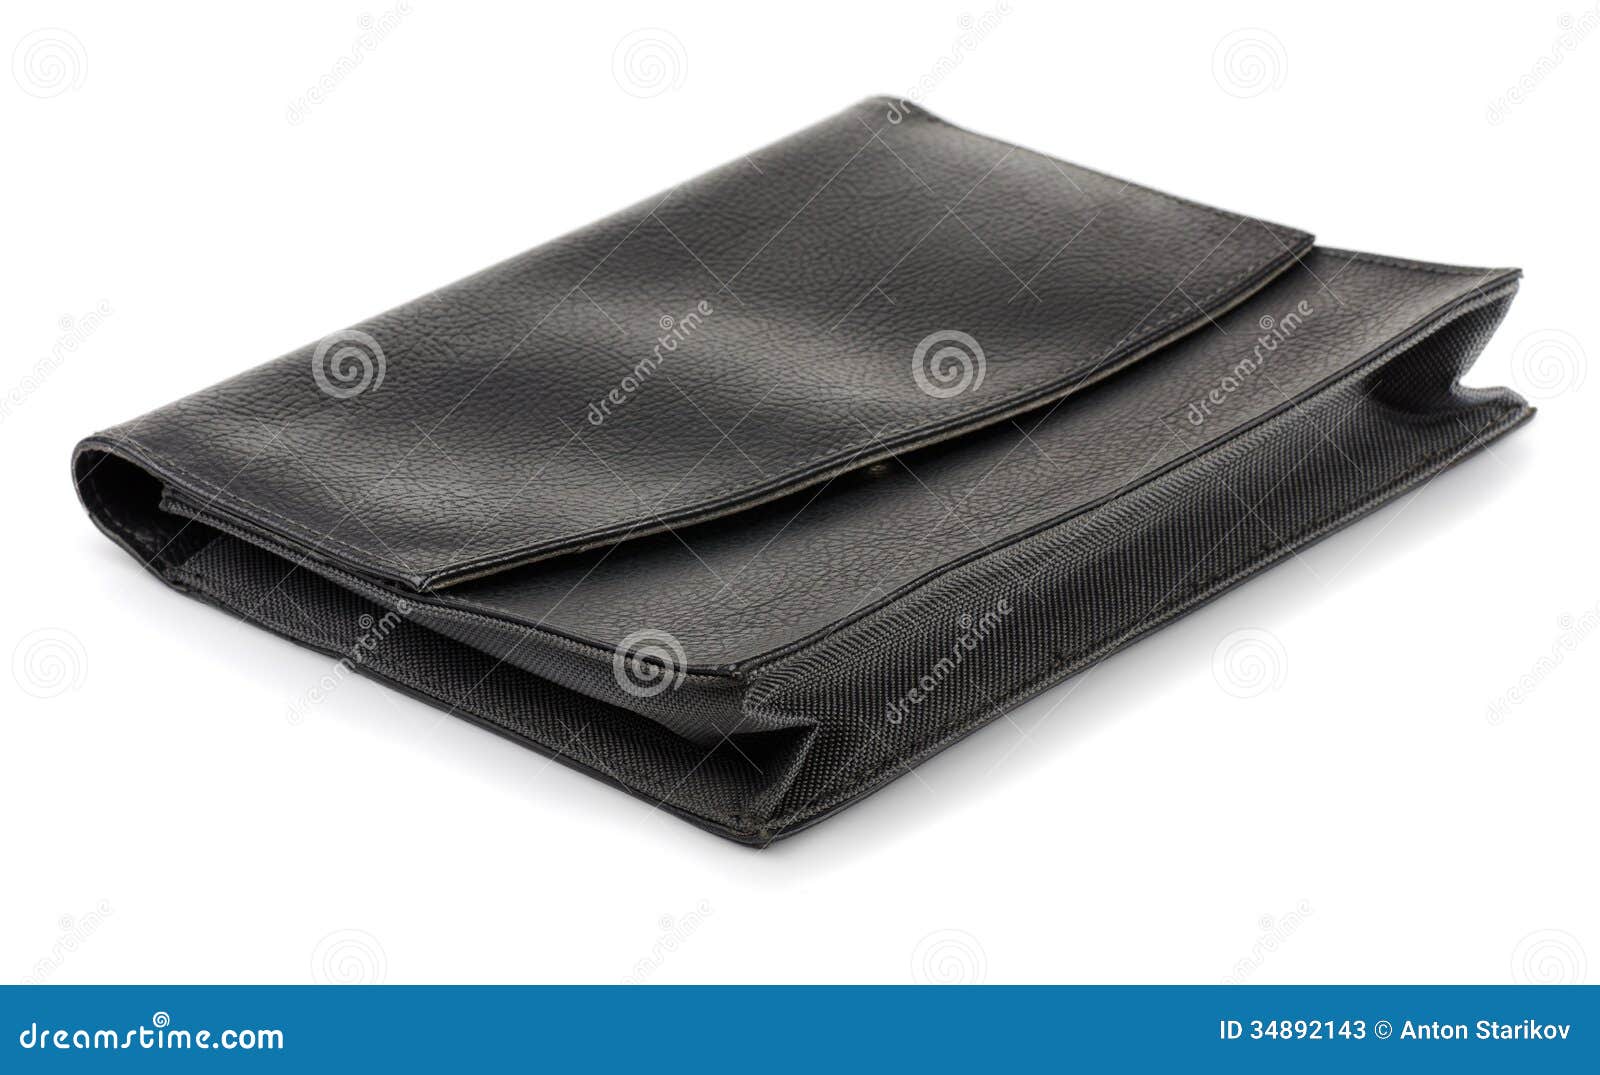 Document pouch stock image. Image of document, horizontal - 34892143